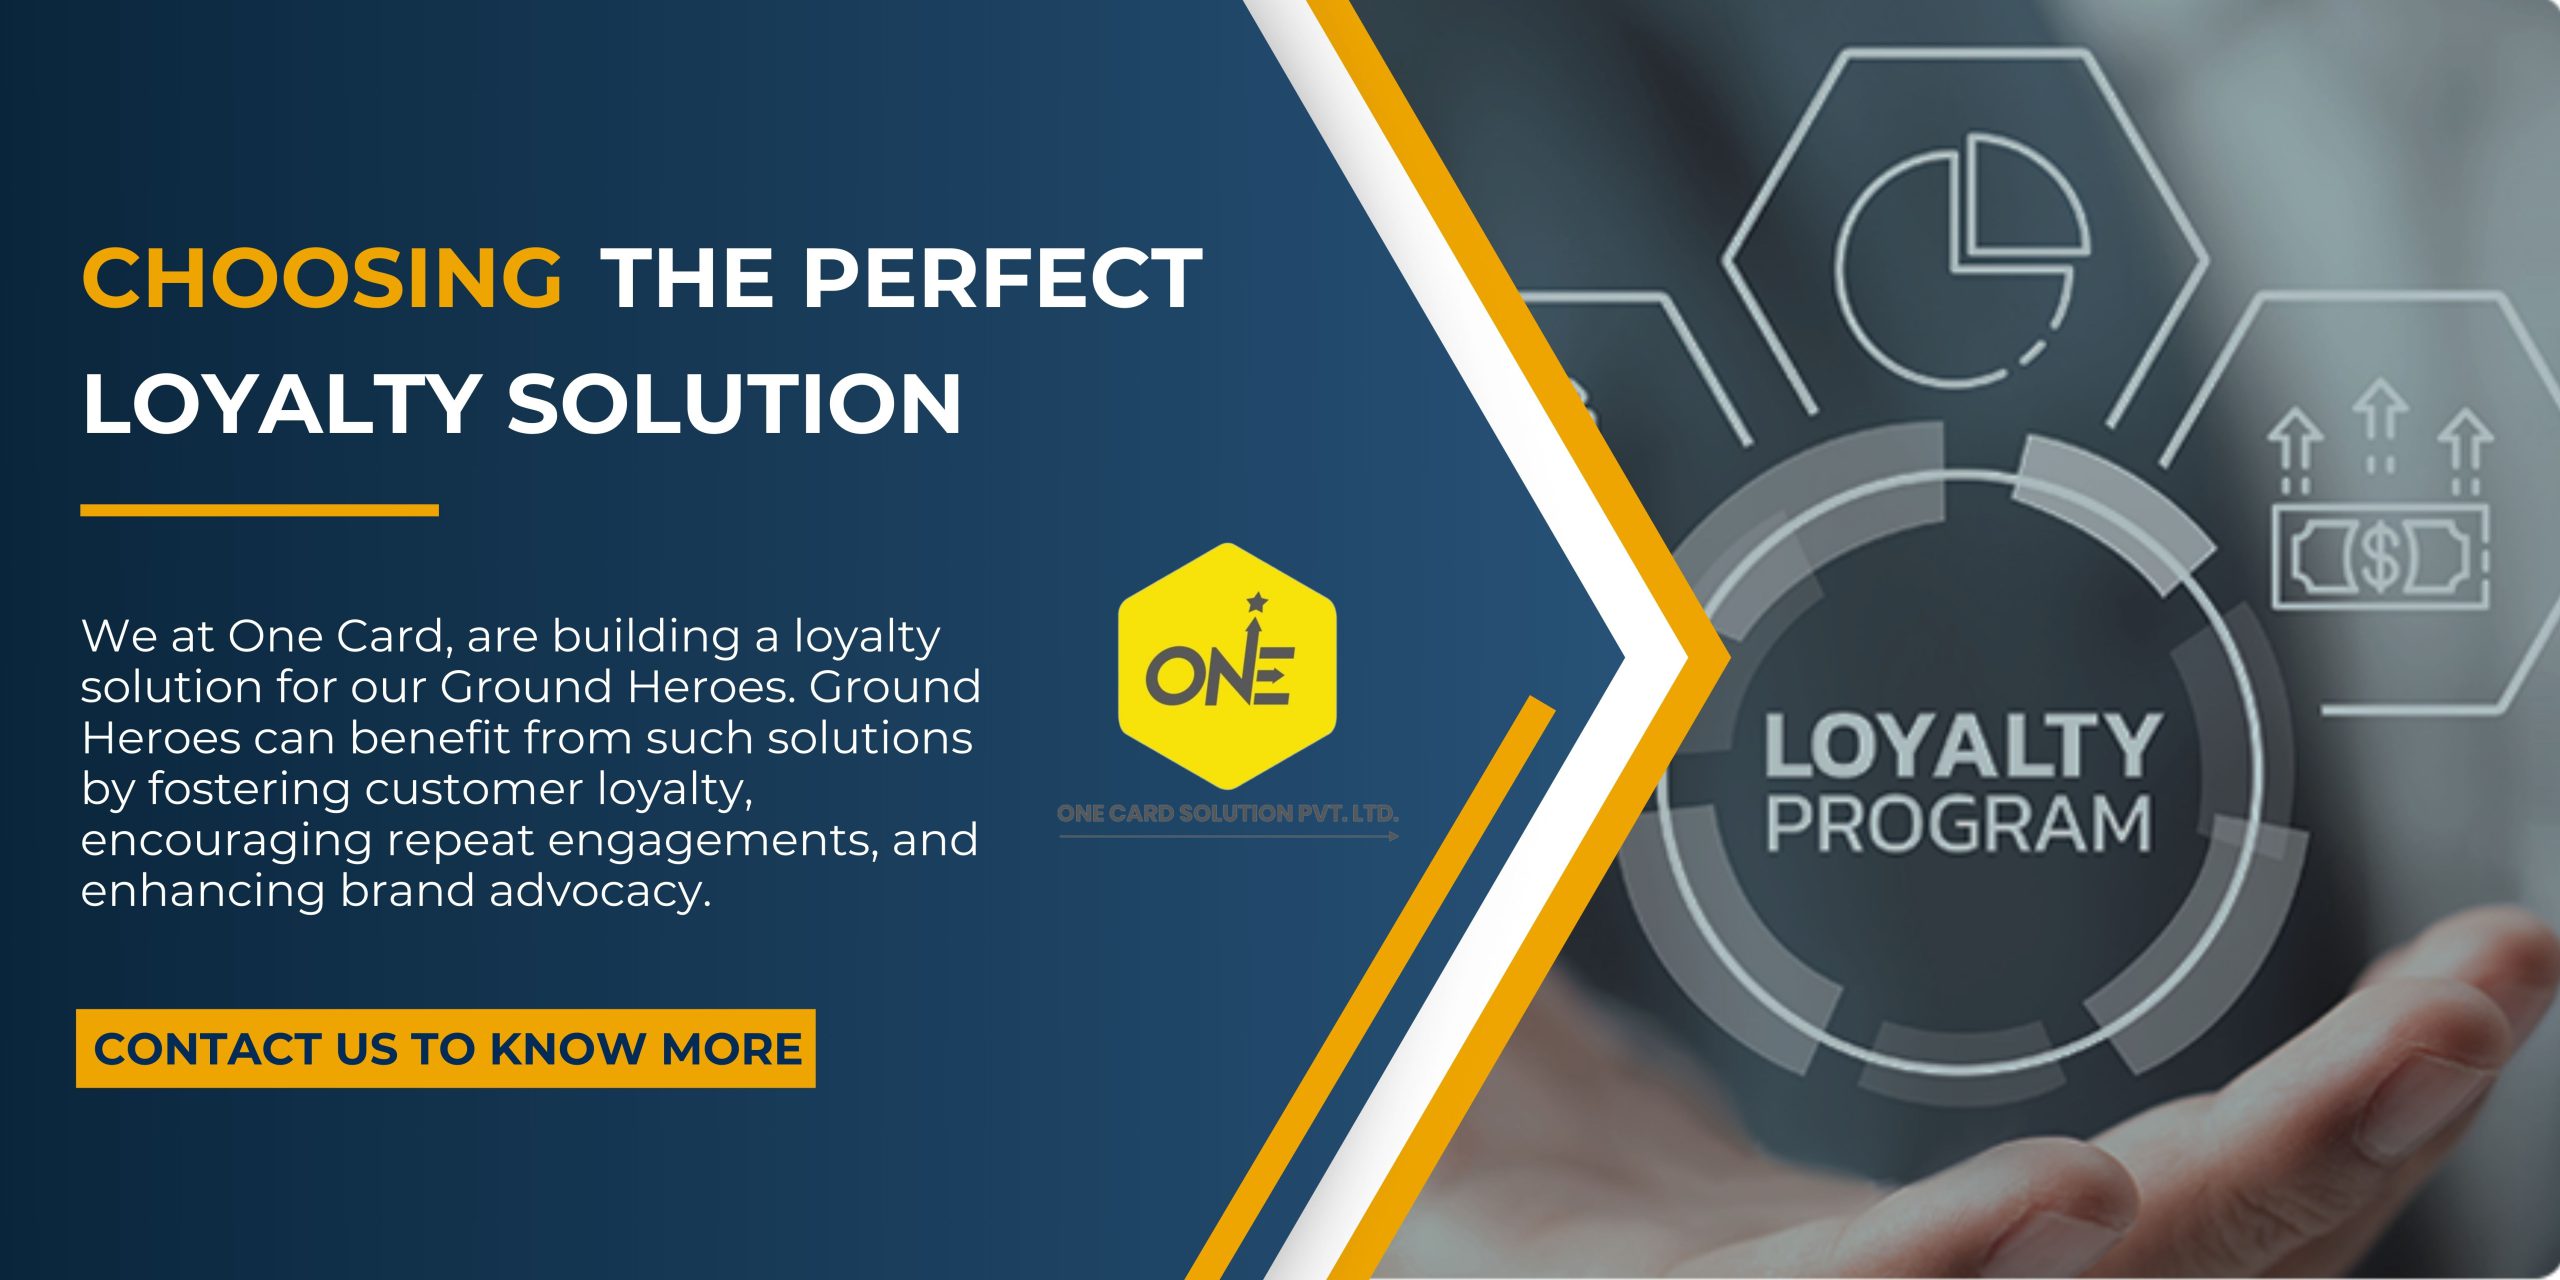 How to choose the perfect loyalty solution for your business?